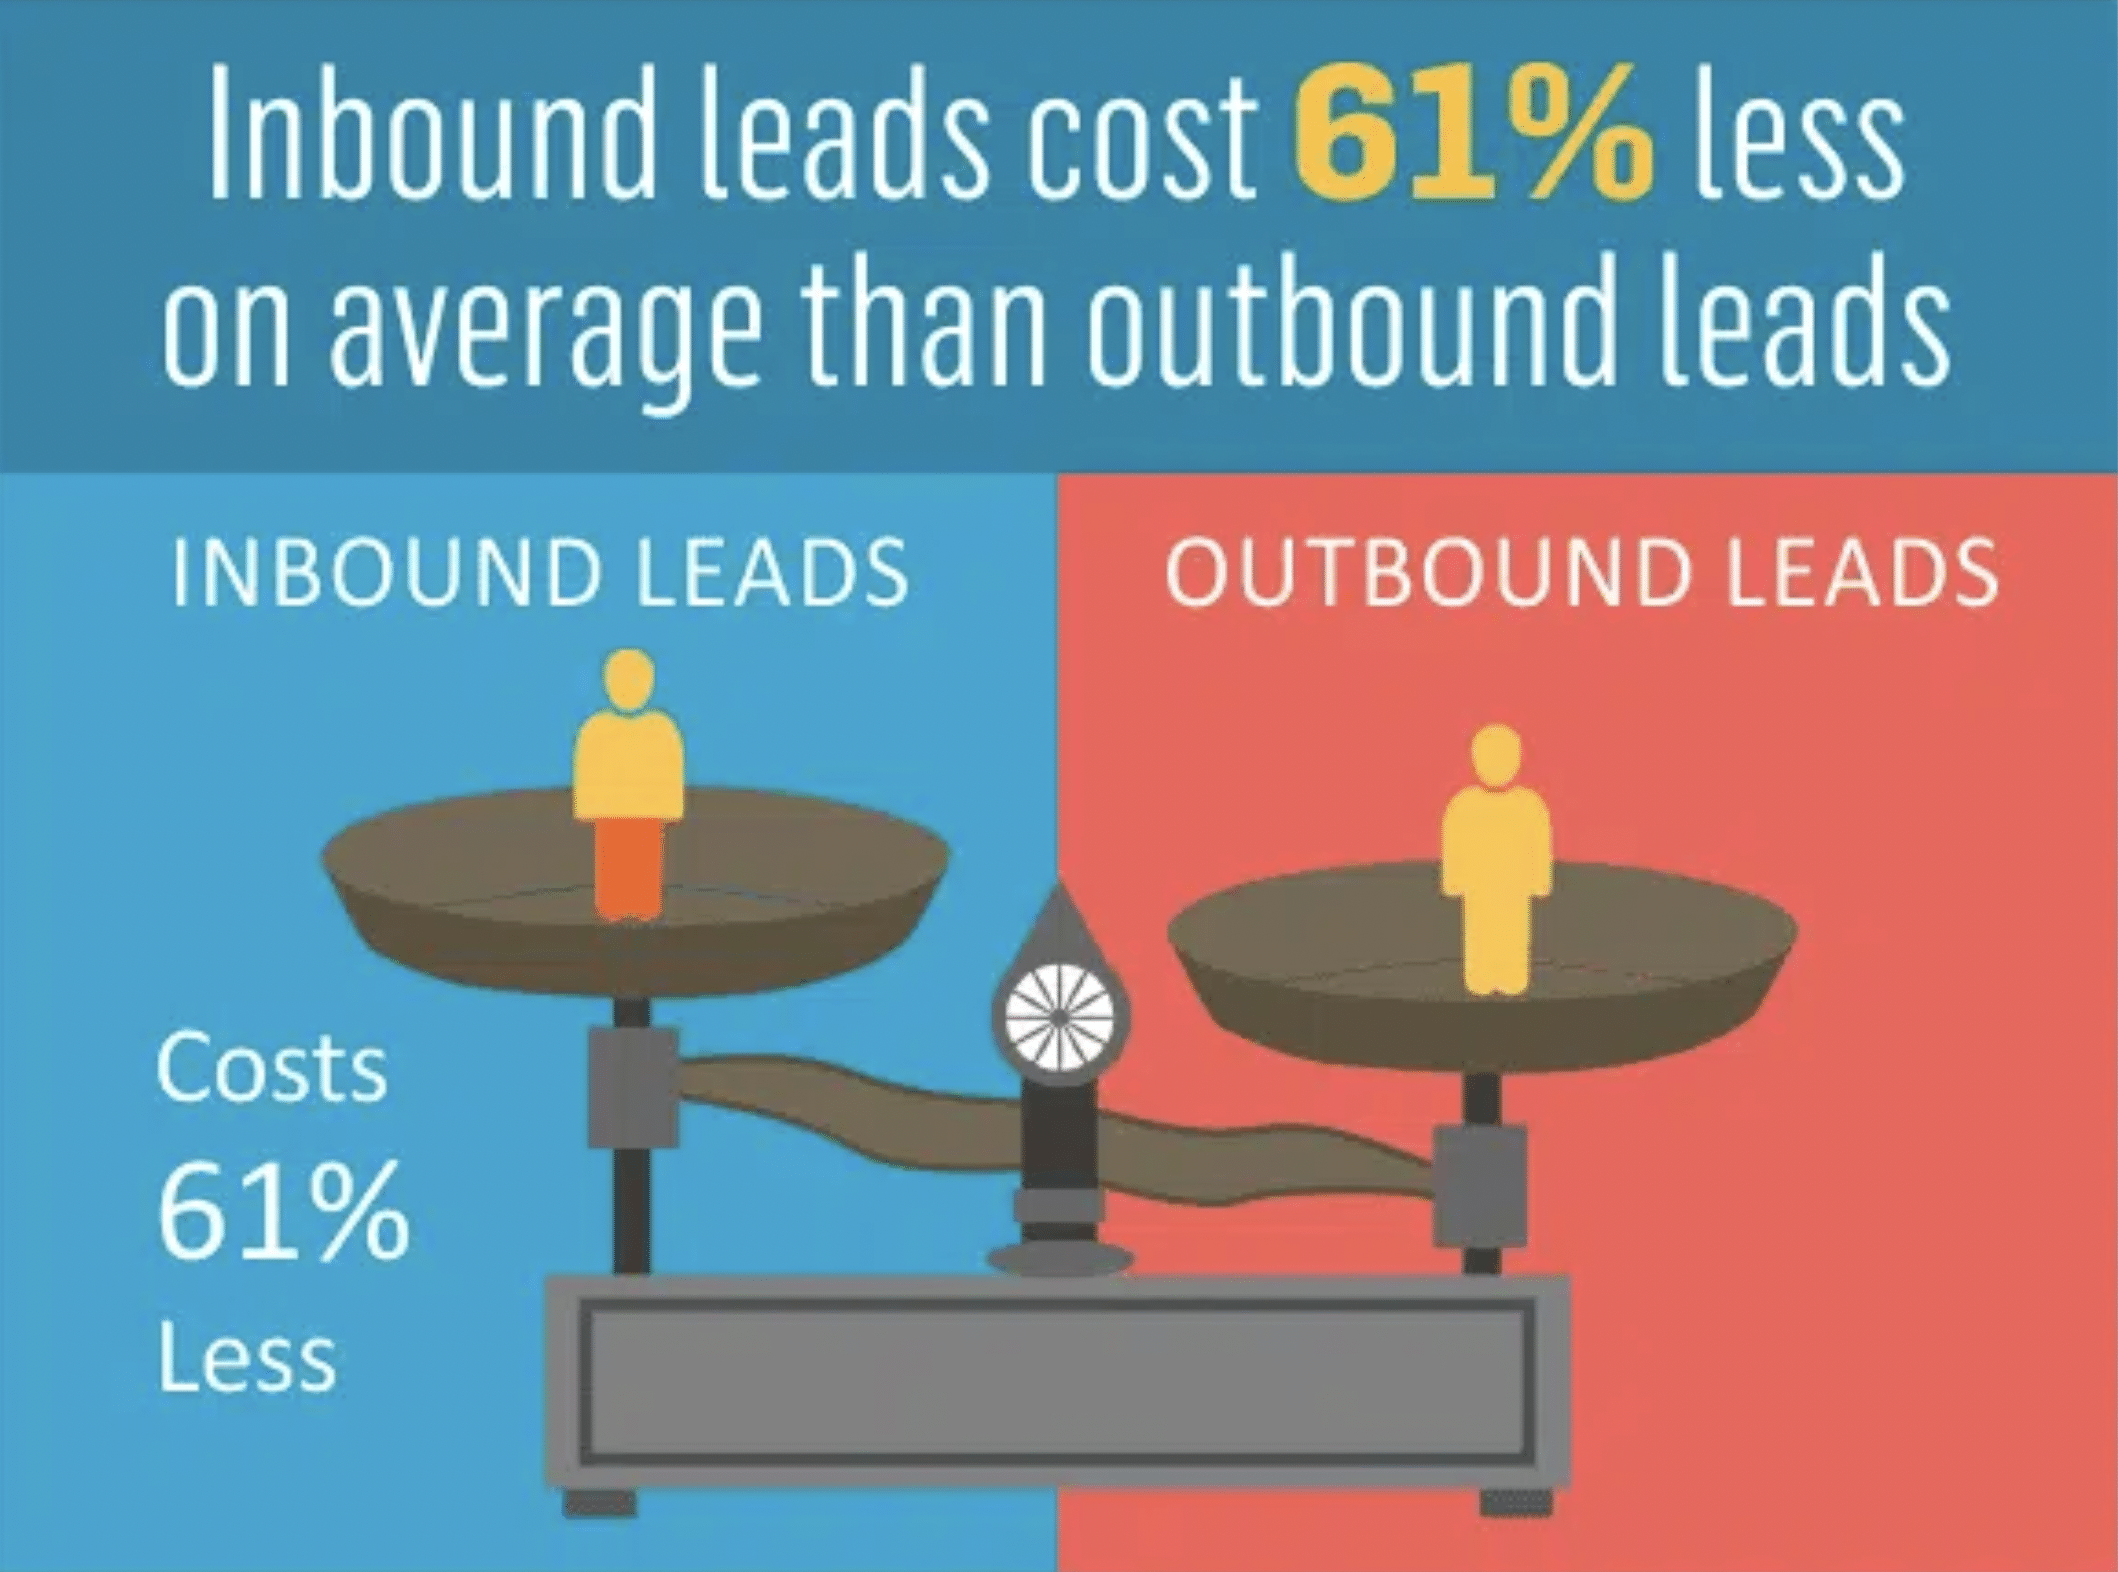 graphic shows that inbound leads cost 61% less on average than outbound leads